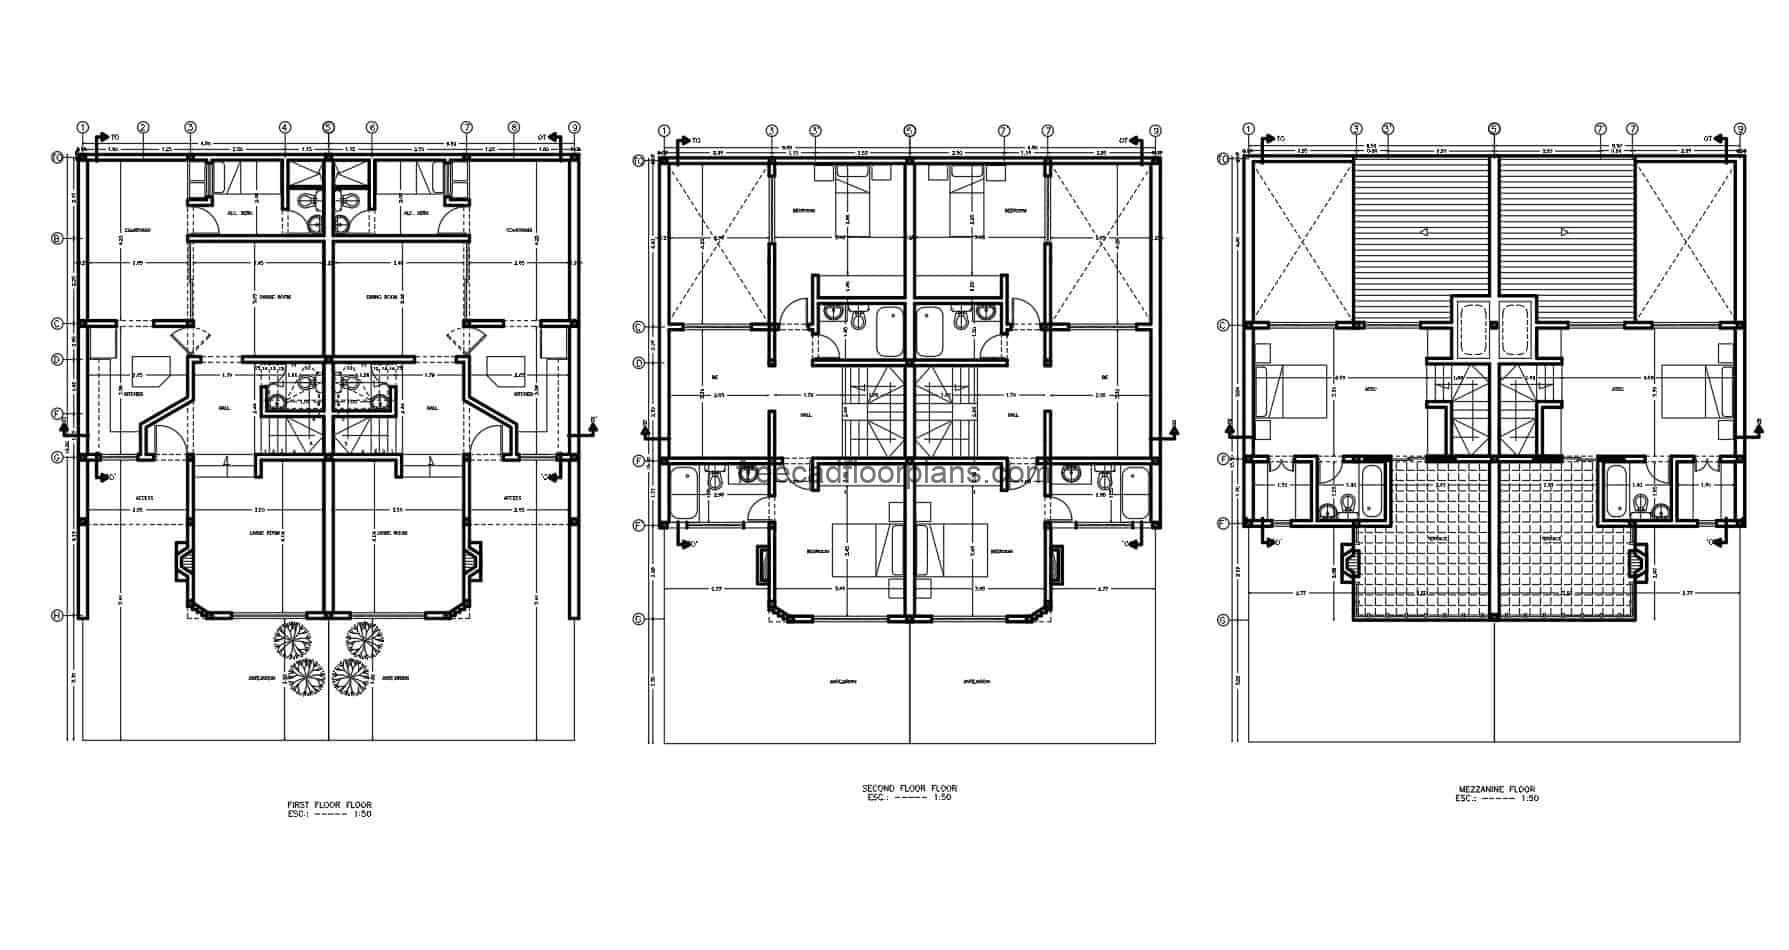 2D plans of two-level residence with mezzanine and six rooms in total, the upper rooms have access to front terraces, the house has sloping ceilings and works with duplex style. Each side of the house has three bedrooms ,two bathrooms, living room, dining room, garden area. Cad DWG plans for free download, sized floor plan, elevations, sections, details, Autocad blocks.